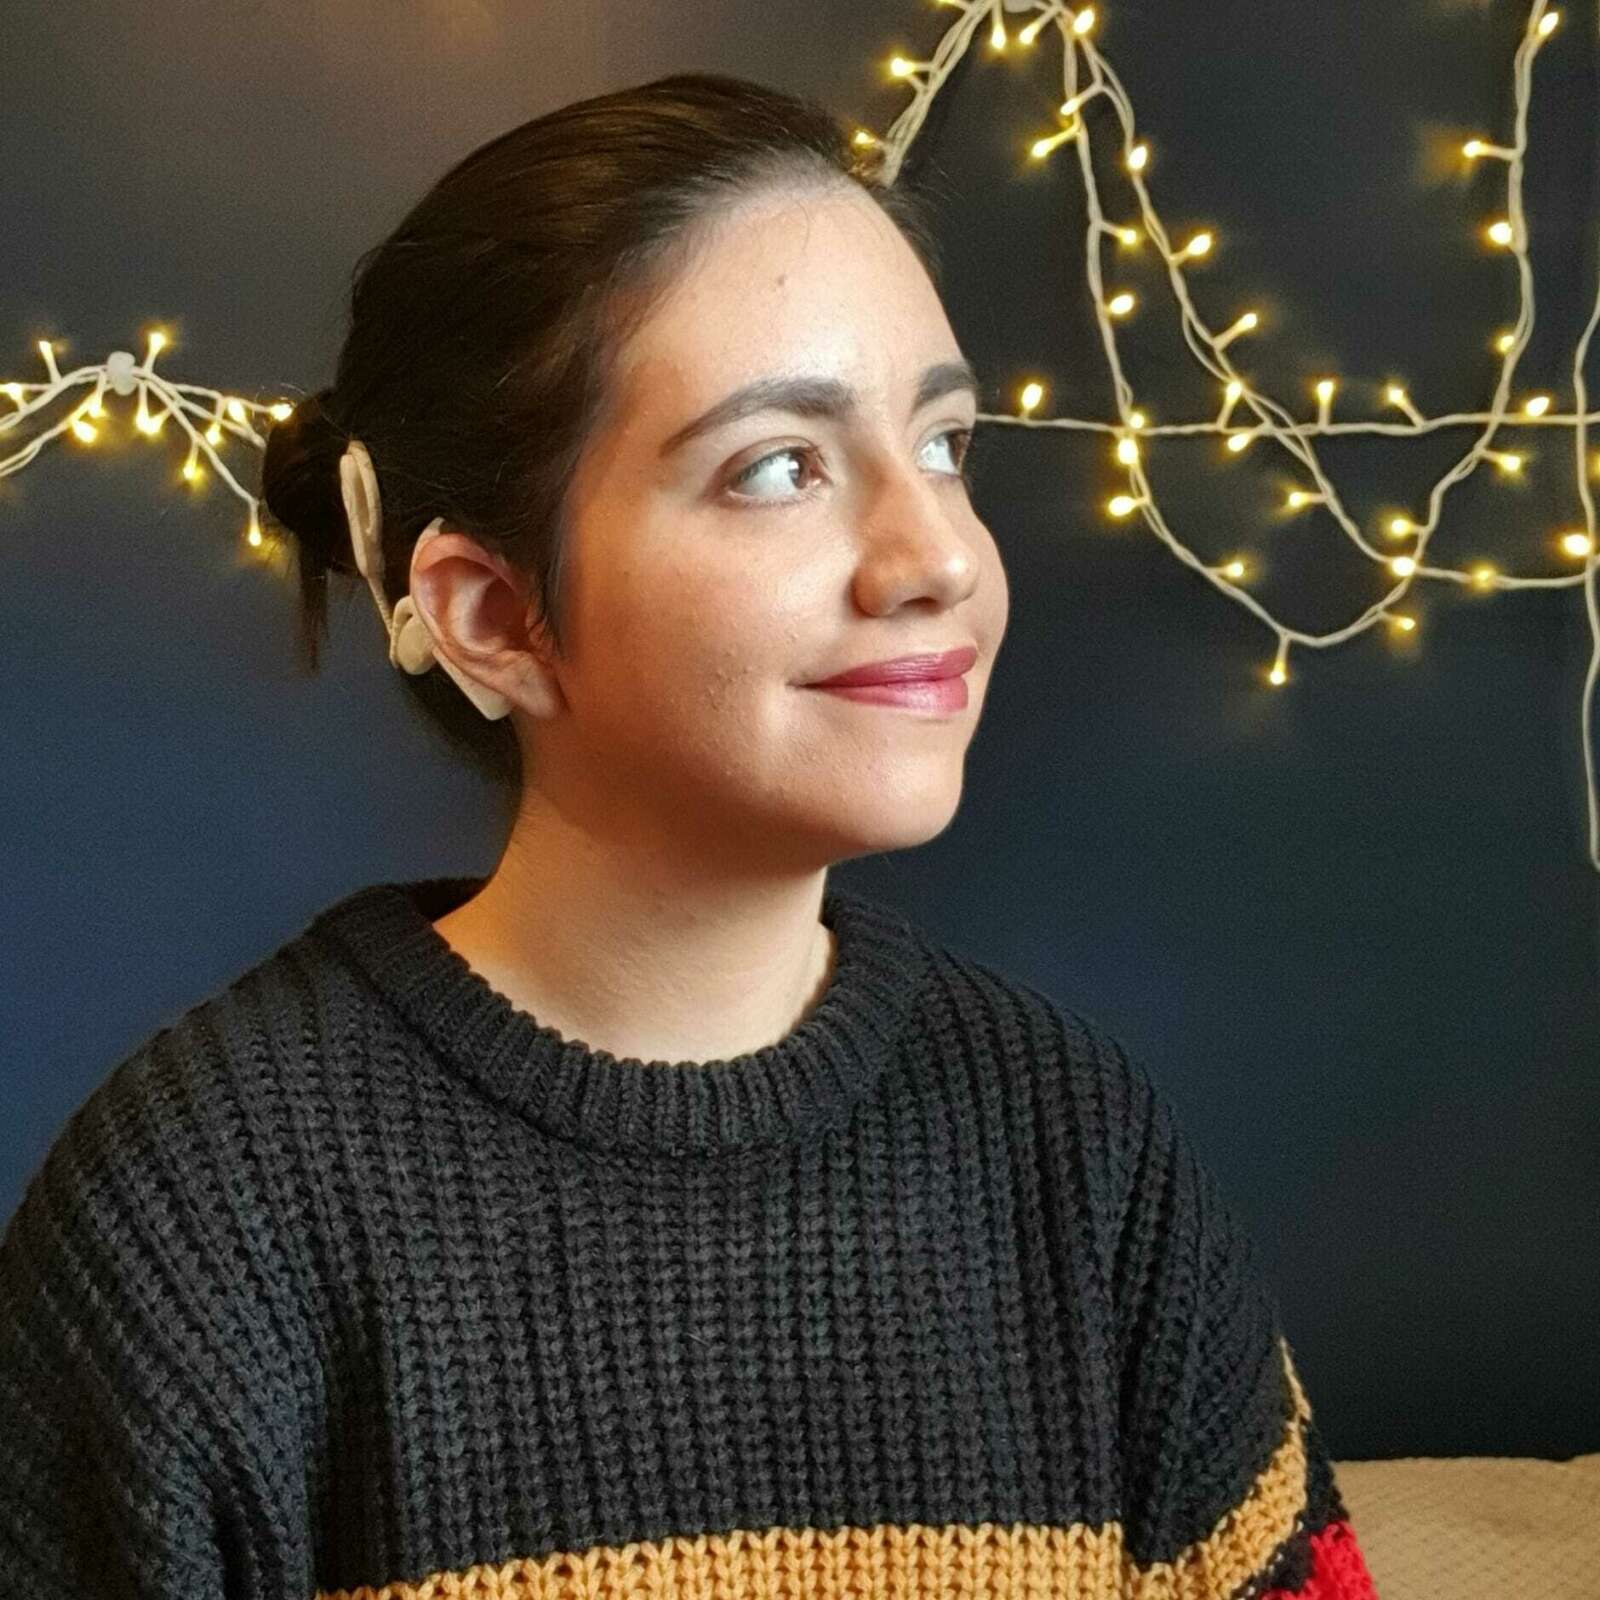 Gabriella is looking into the distance smiling. She has brown skin and dark tied black hair. She is wearing a black jumper and red lipstick.